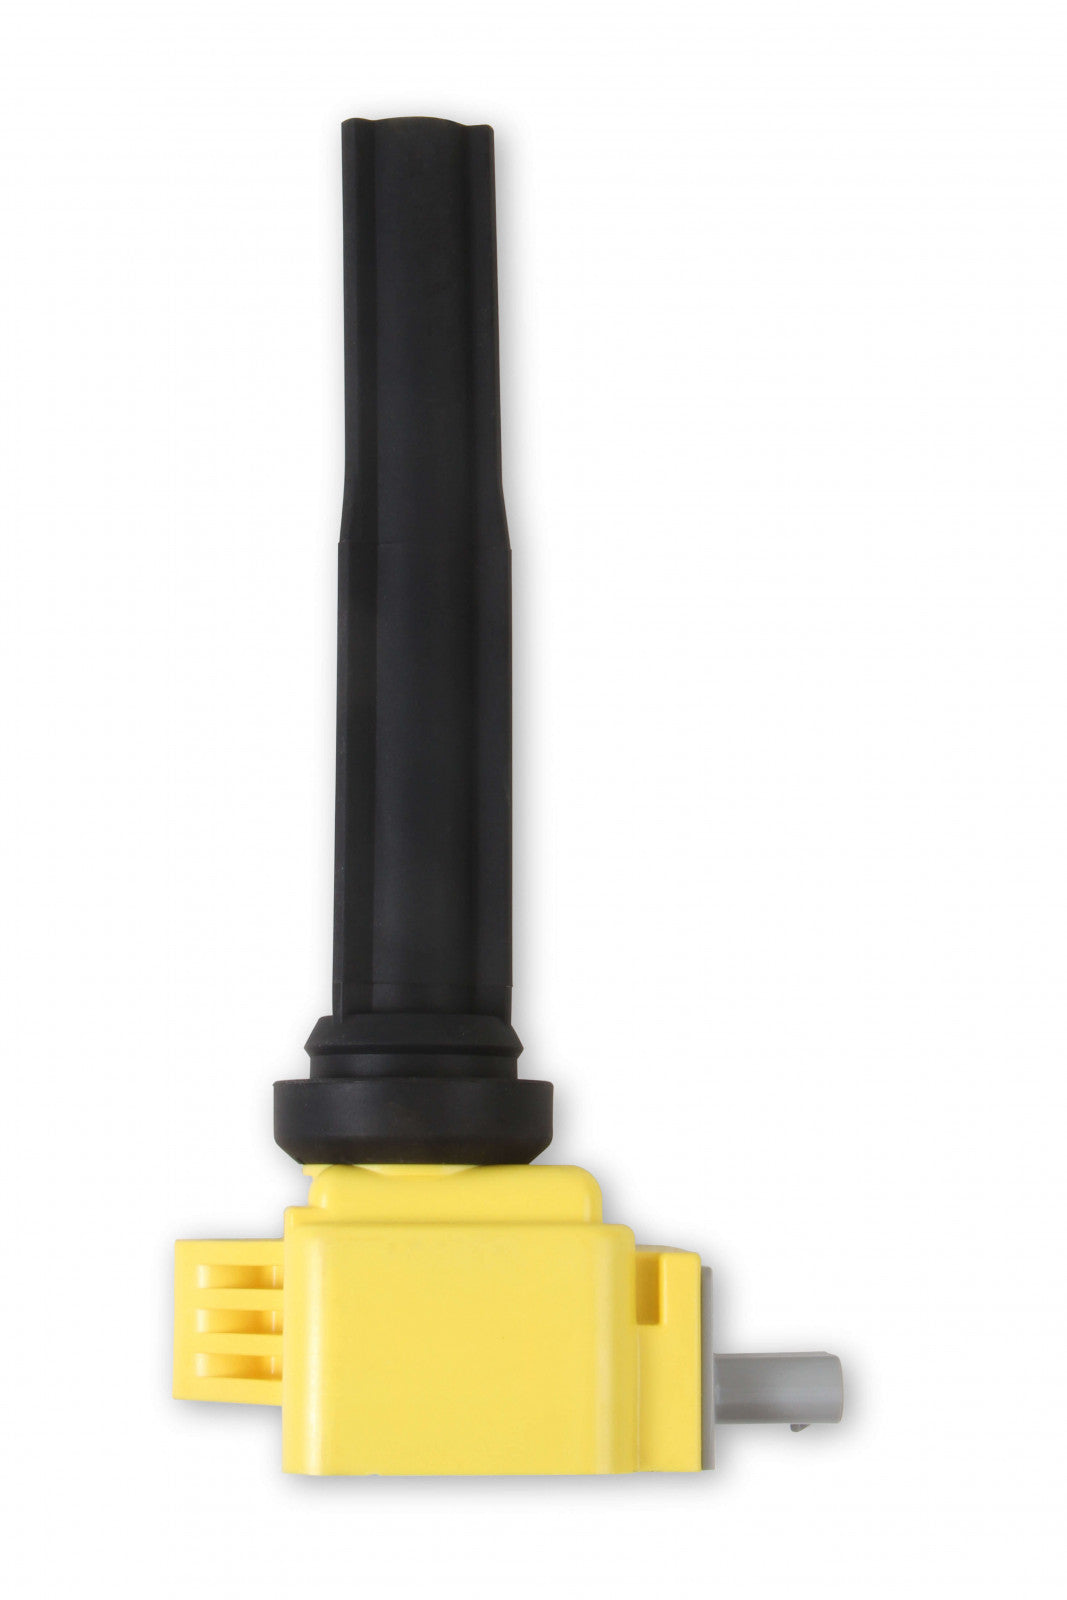 ACCEL Ignition Coil - SuperCoil - 2016 Ford EcoBoost 2.7L V6 - Yellow - Individual